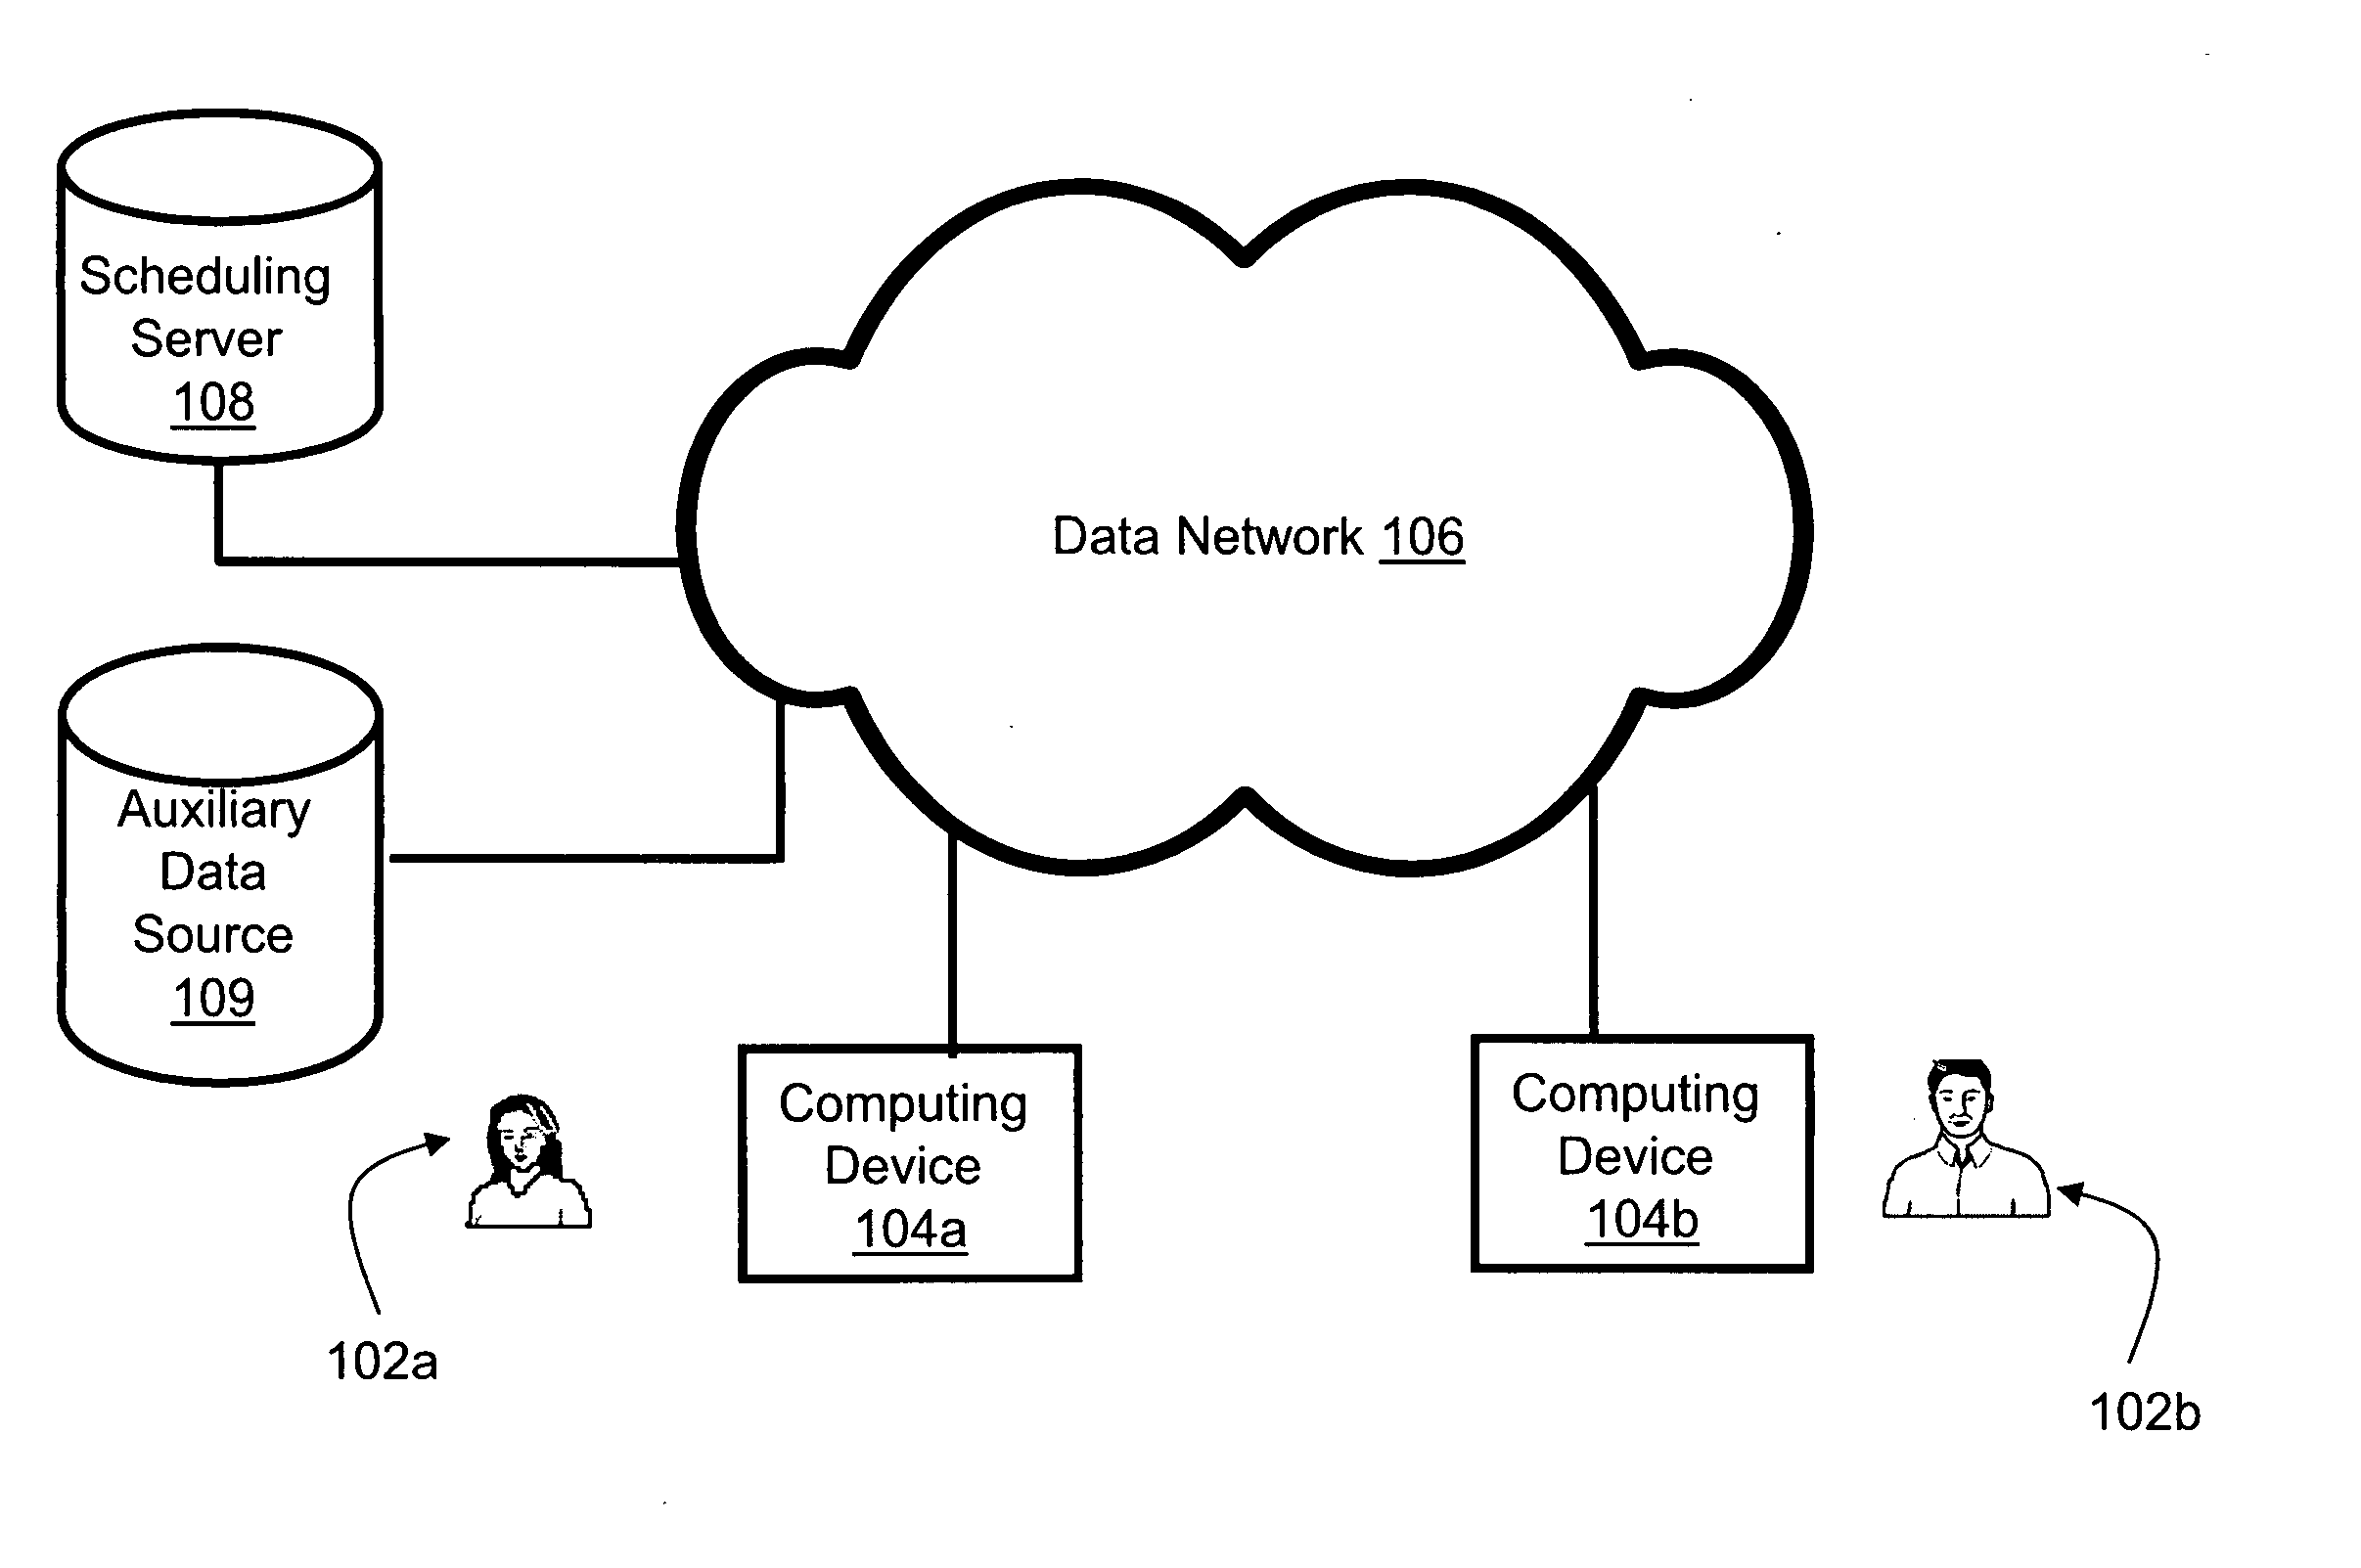 Method, system and apparatus for participant verification in a multi-party call environment